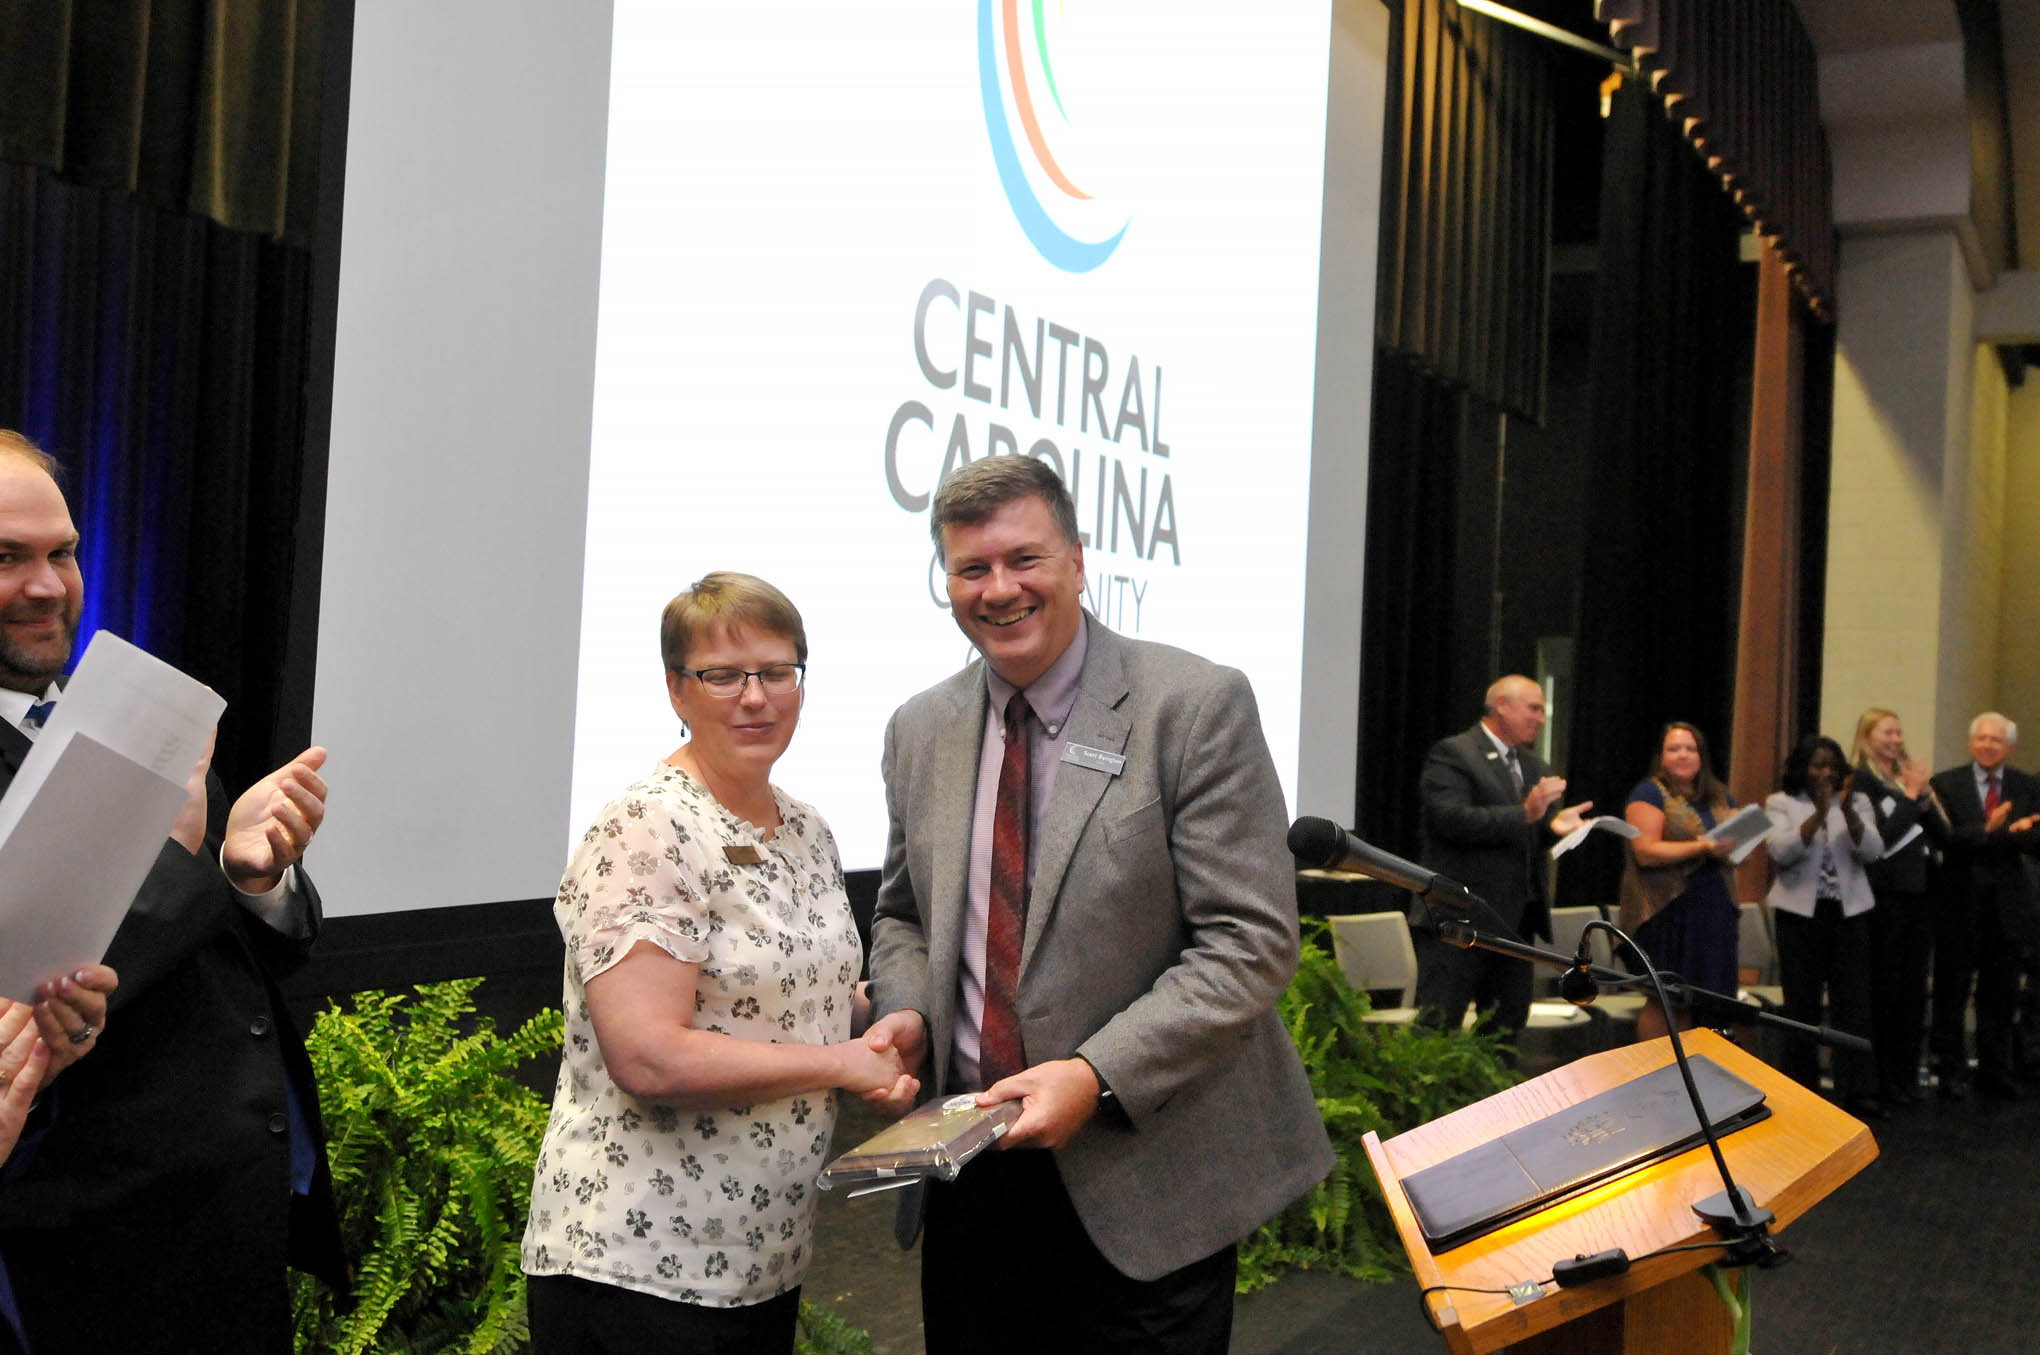 Click to enlarge,  Central Carolina Community College Dean of Arts, Sciences and Advising Scott Byington (right) receives the Staff Member of the Year award from 2018 recipient and CCCC Student Learning Coordinator Angela Crisp-Sears (left) during the Convocation and Installation of Dr. Lisa M. Chapman as Sixth President of CCCC on Sept. 26. 